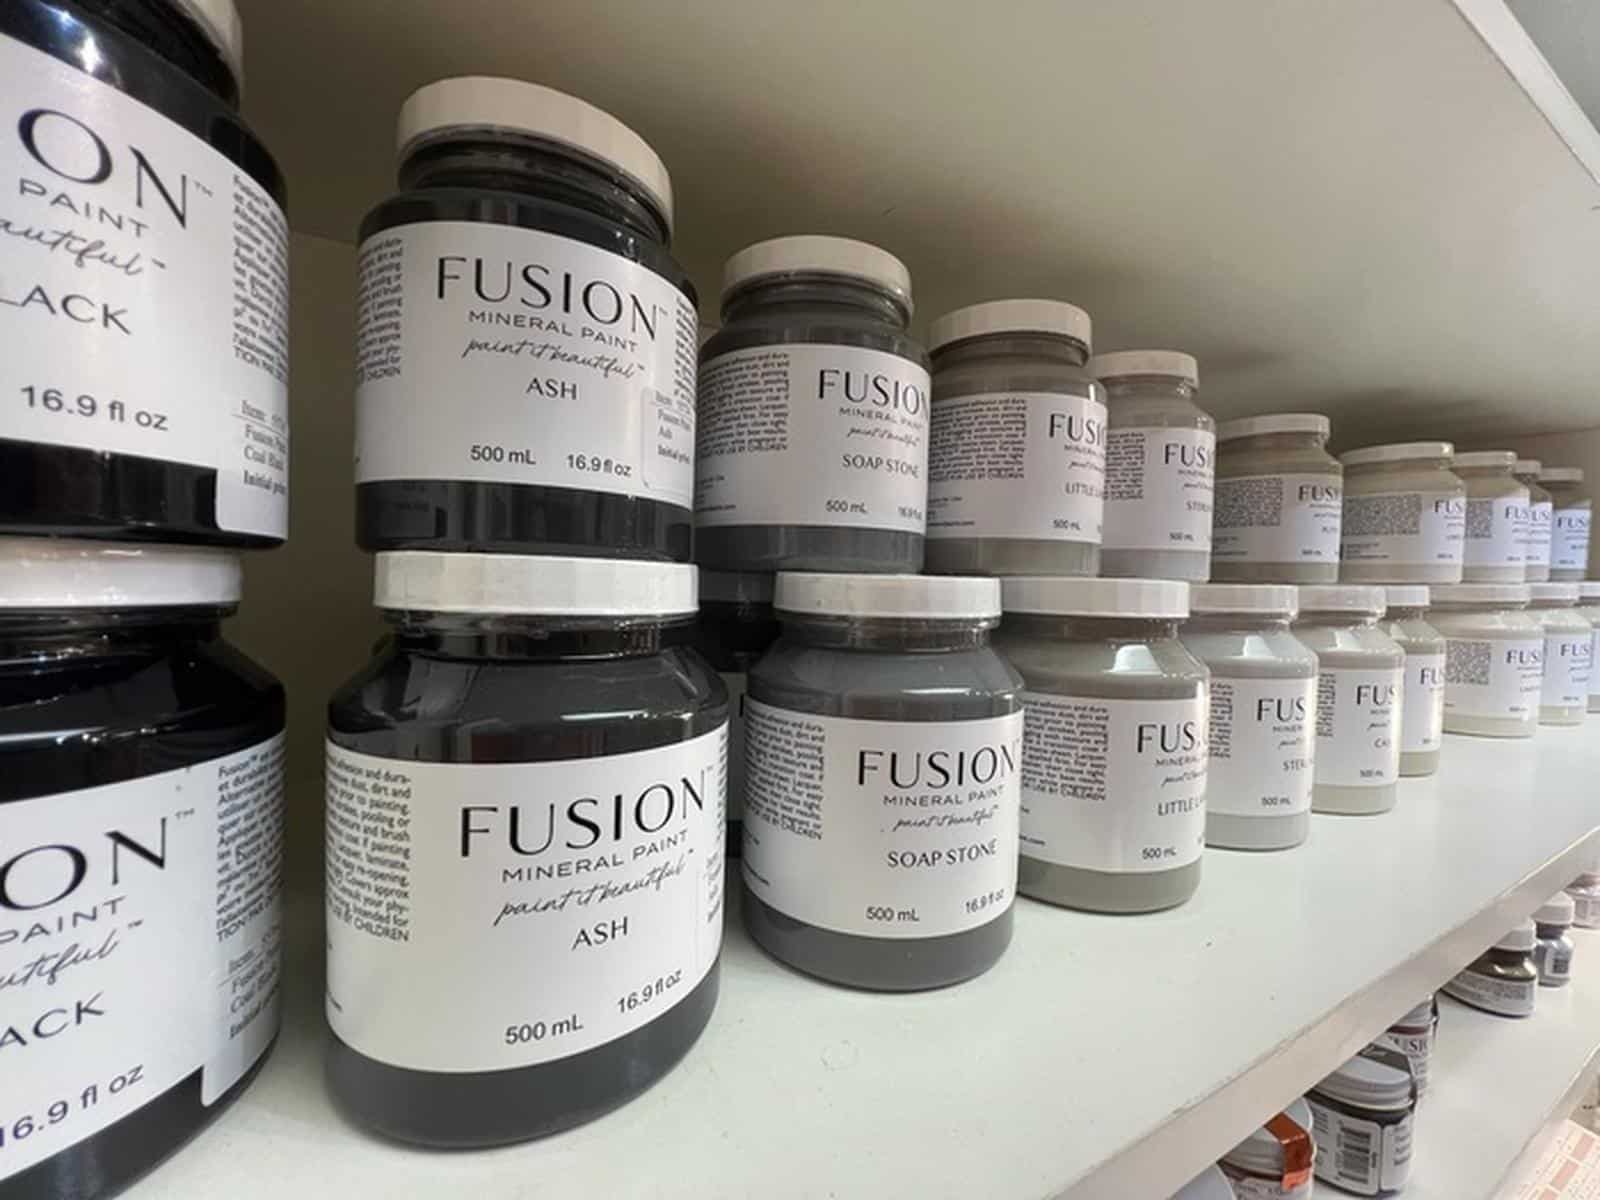 Fusion™ Mineral Paint - Rooms Blooms And More